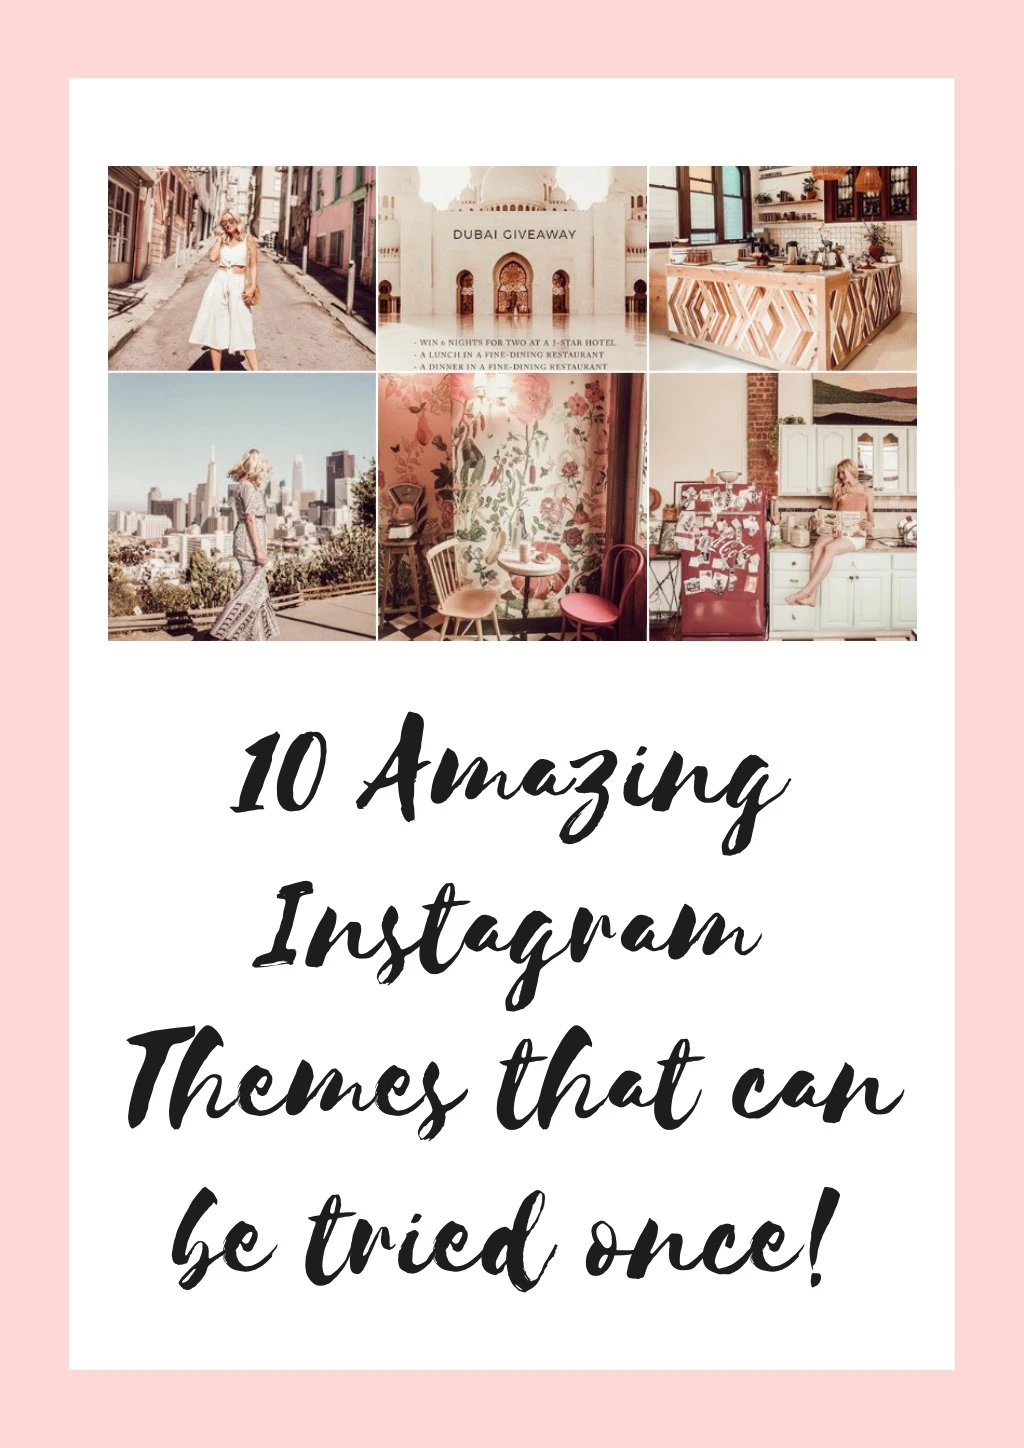 10 amazing instagram themes that can be tried once